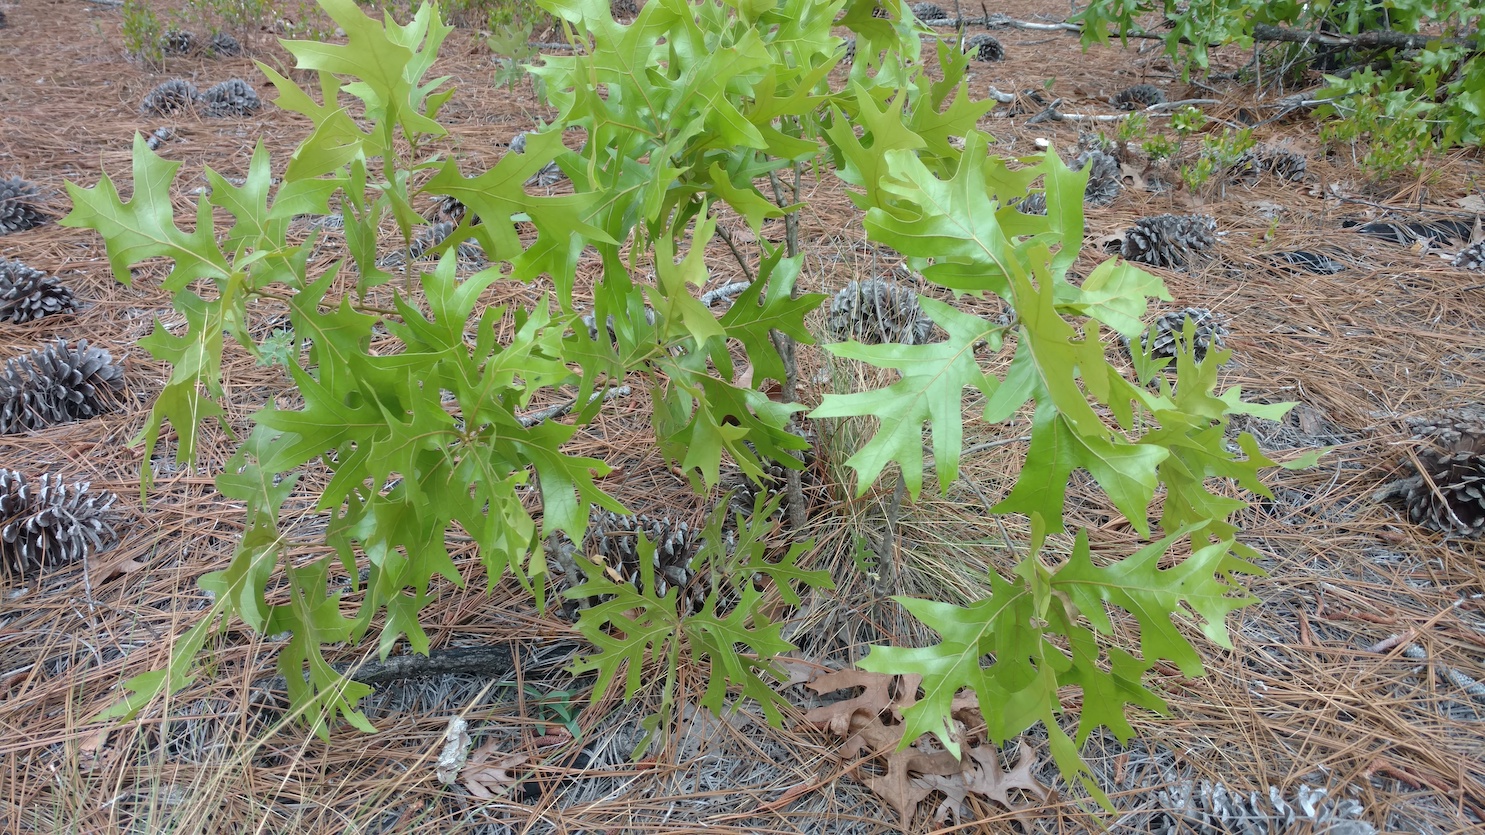 The Scientific Name is Quercus laevis [= Quercus catesbaei]. You will likely hear them called Turkey Oak. This picture shows the Leaves are held vertically to the white sandy soil perhaps to reduce heat reflection. of Quercus laevis [= Quercus catesbaei]